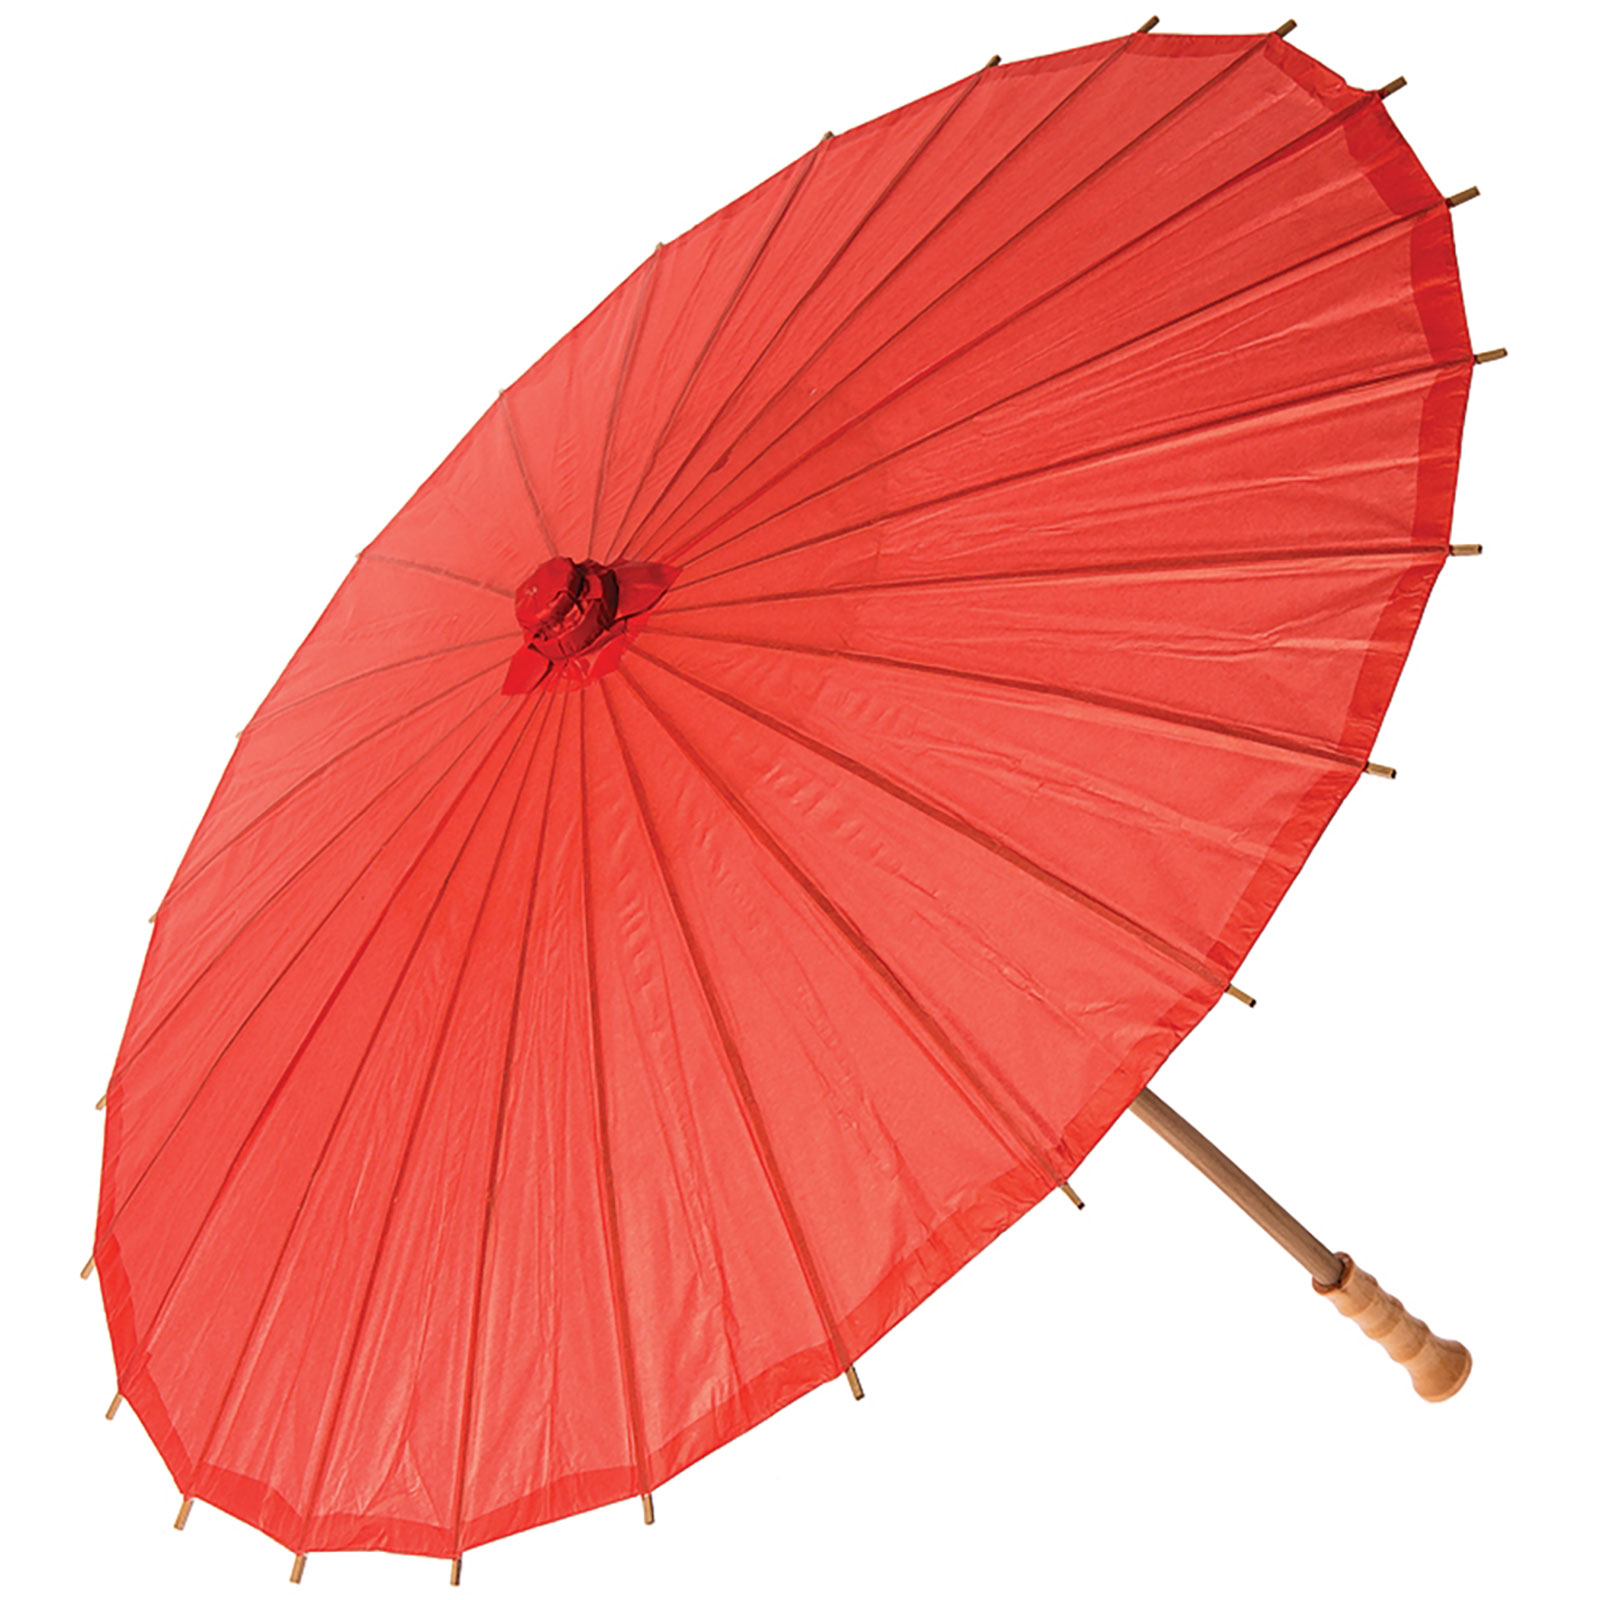 Chinese Paper and Bamboo Parasol with Elegant Handle - Red